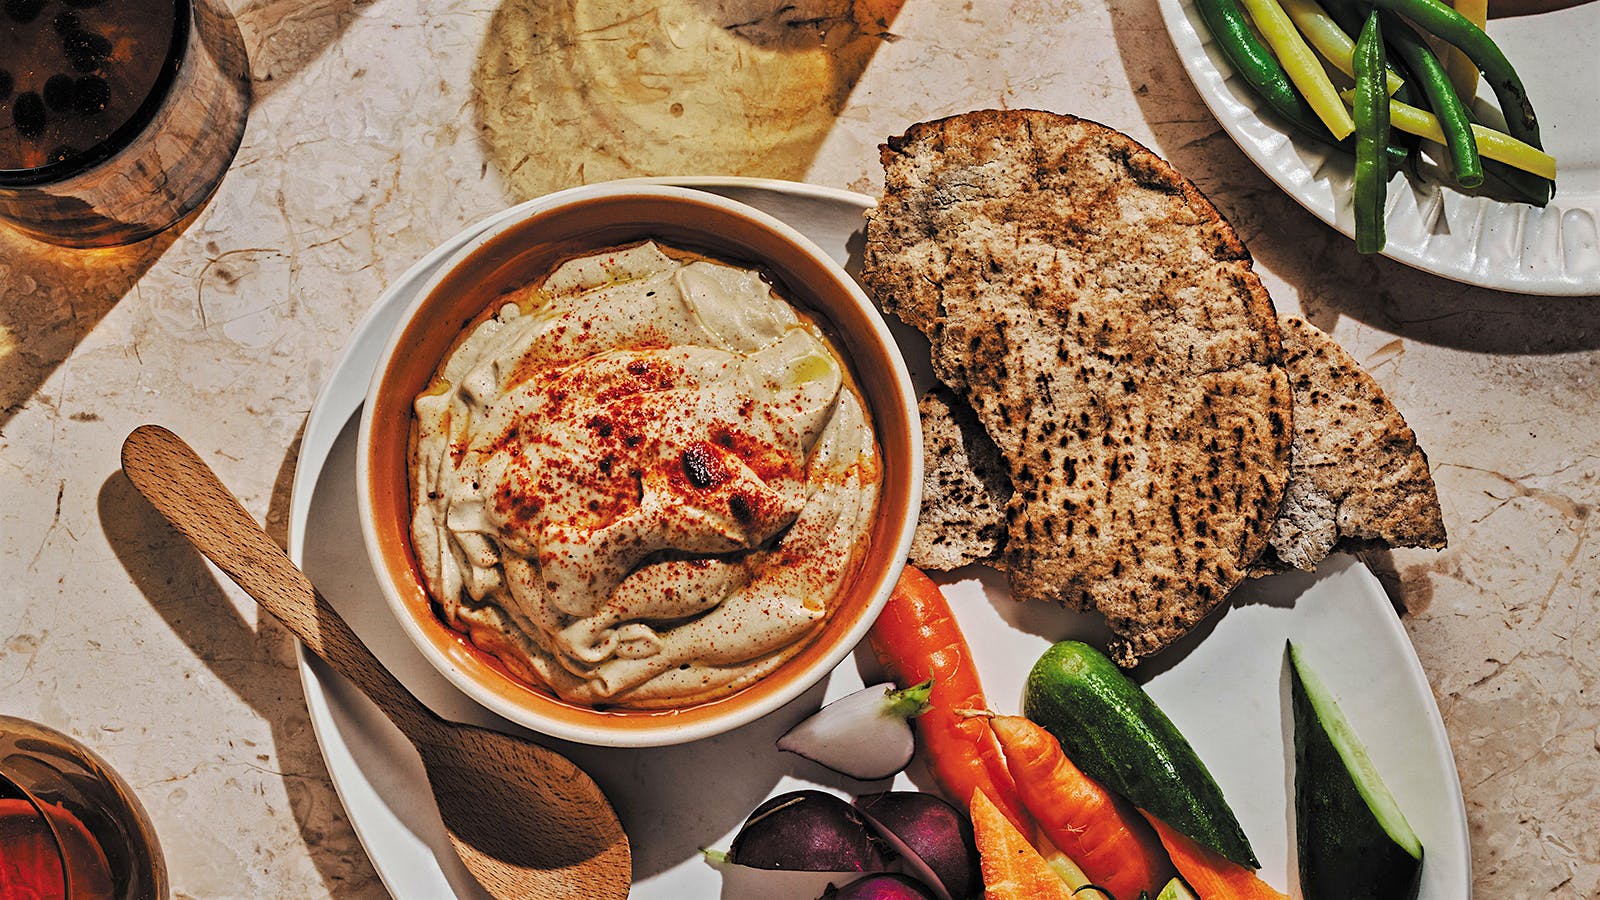 Use Your Grill for a Creamy Eggplant Dip This Memorial Day